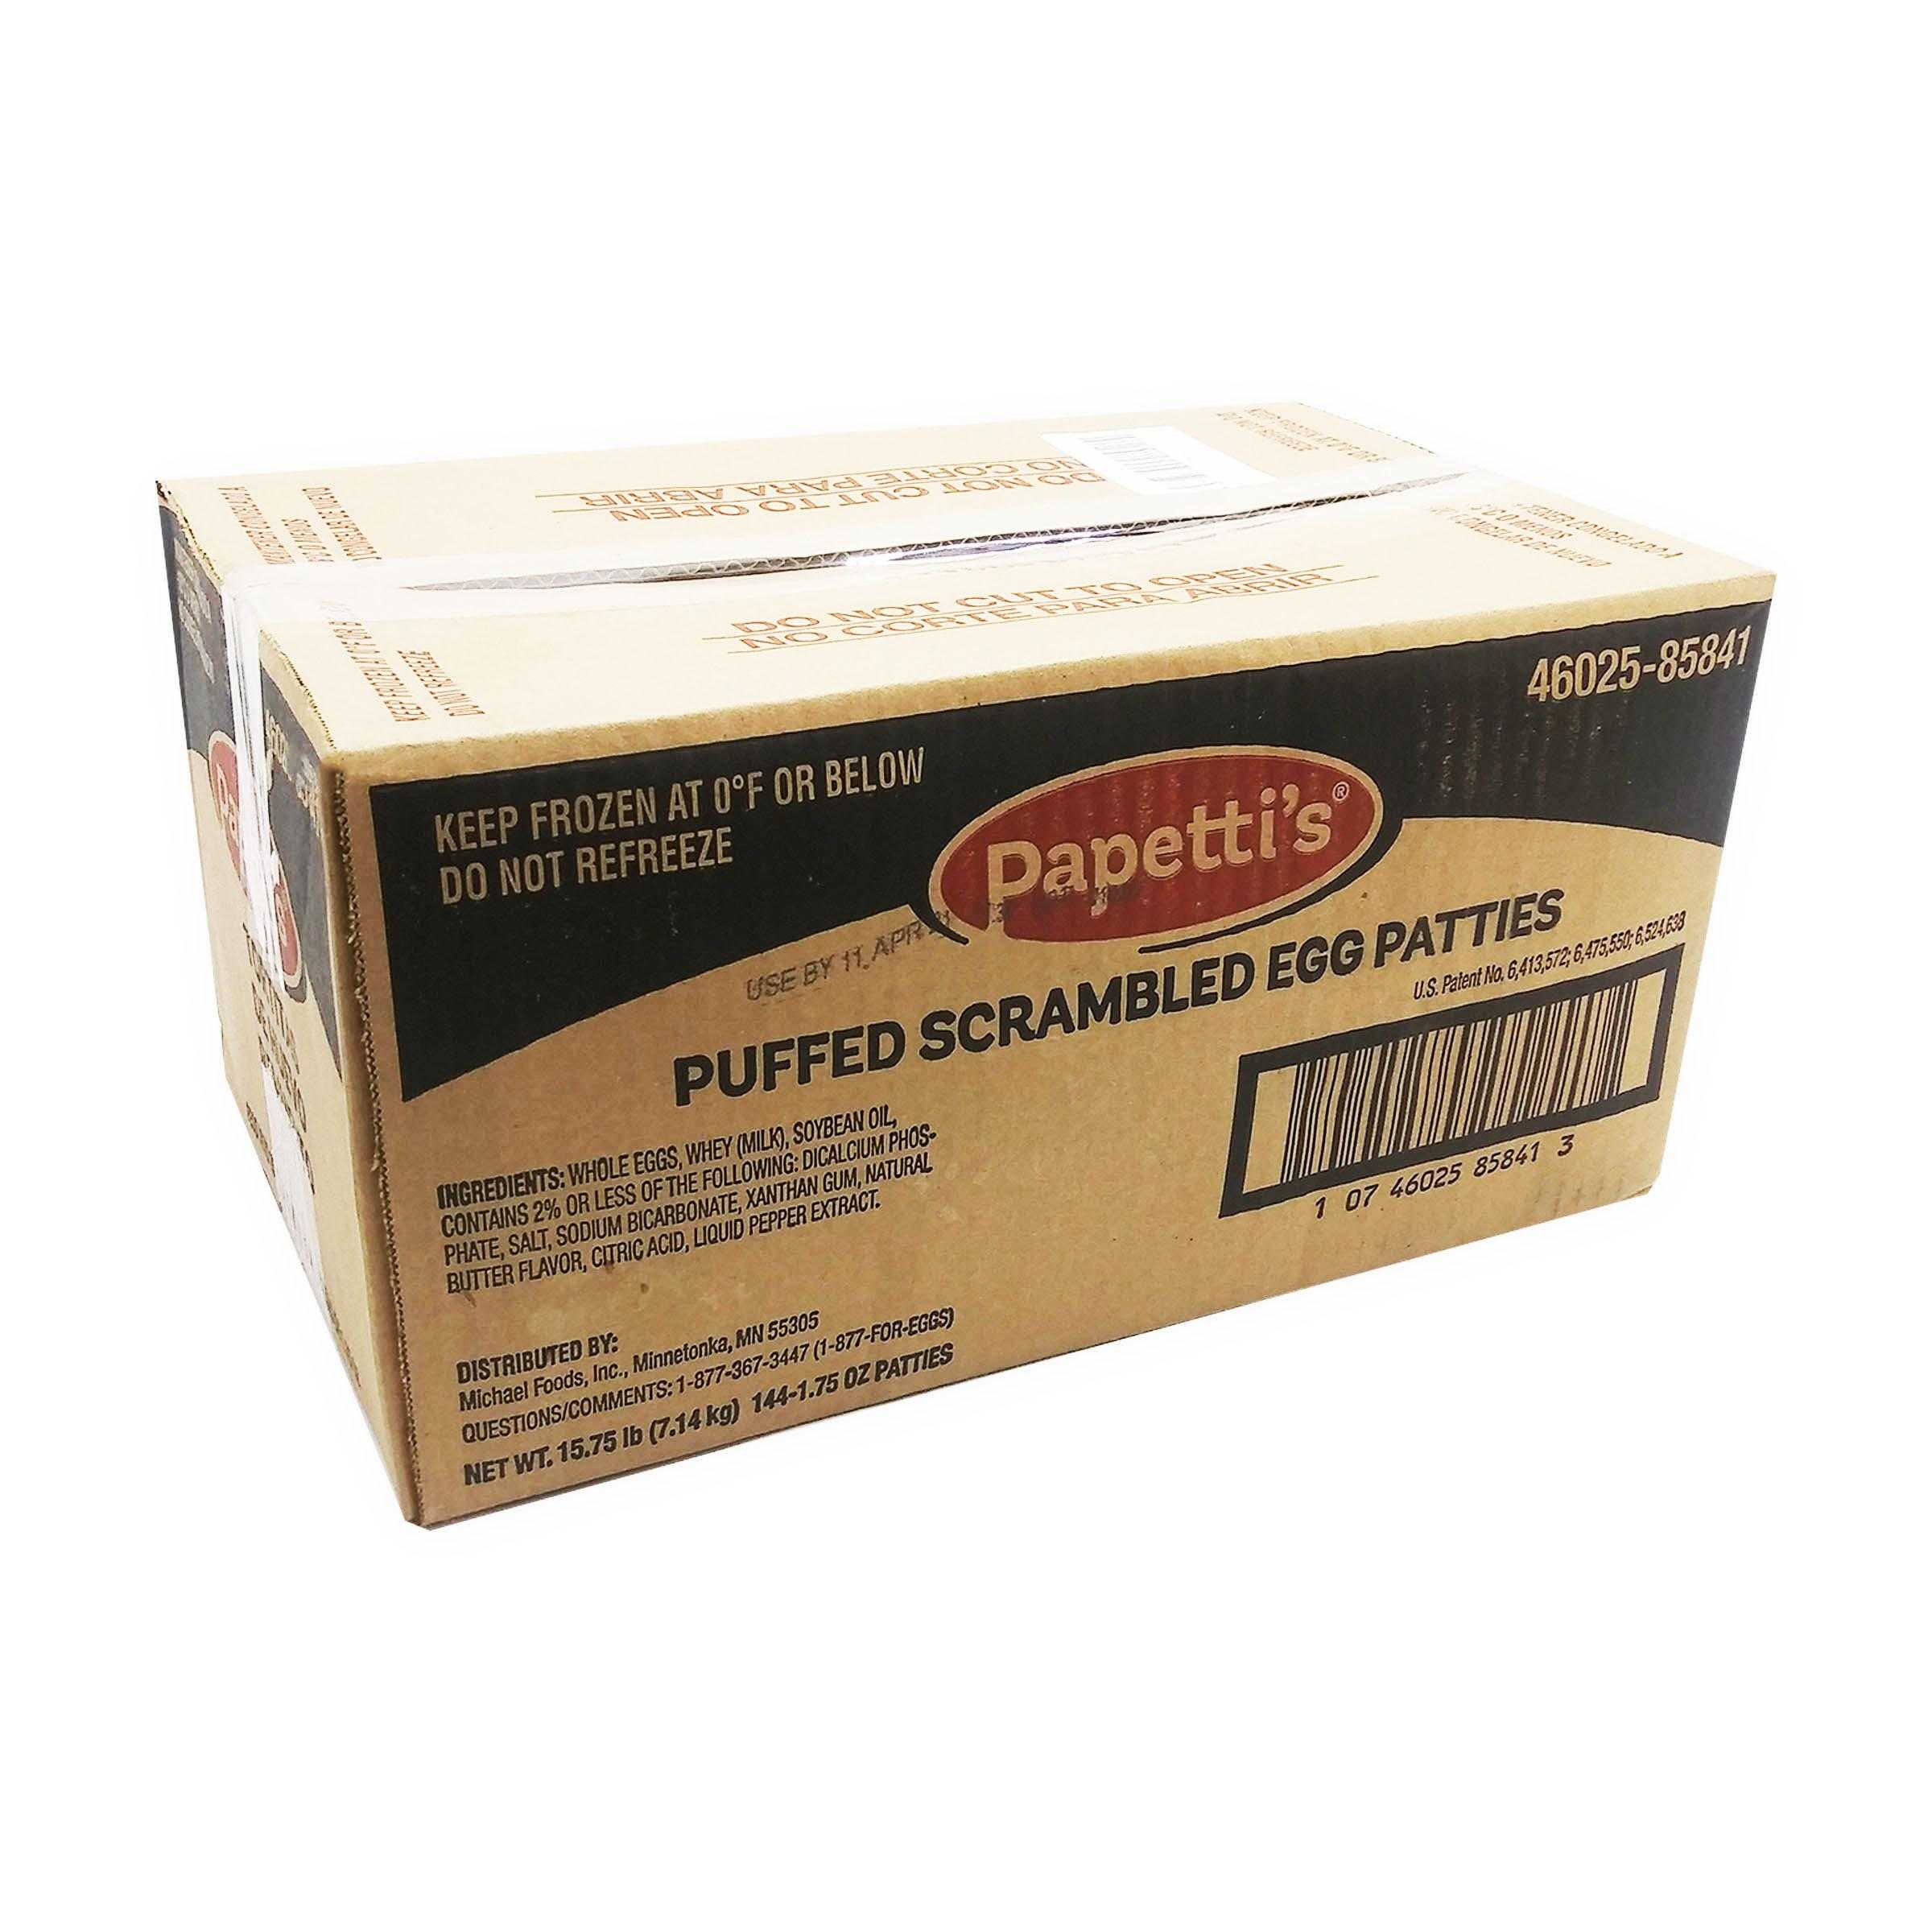 Papetti’s® Fully-Cooked 3.5” Puffed Round Scrambled Egg Patties, 144/1.75